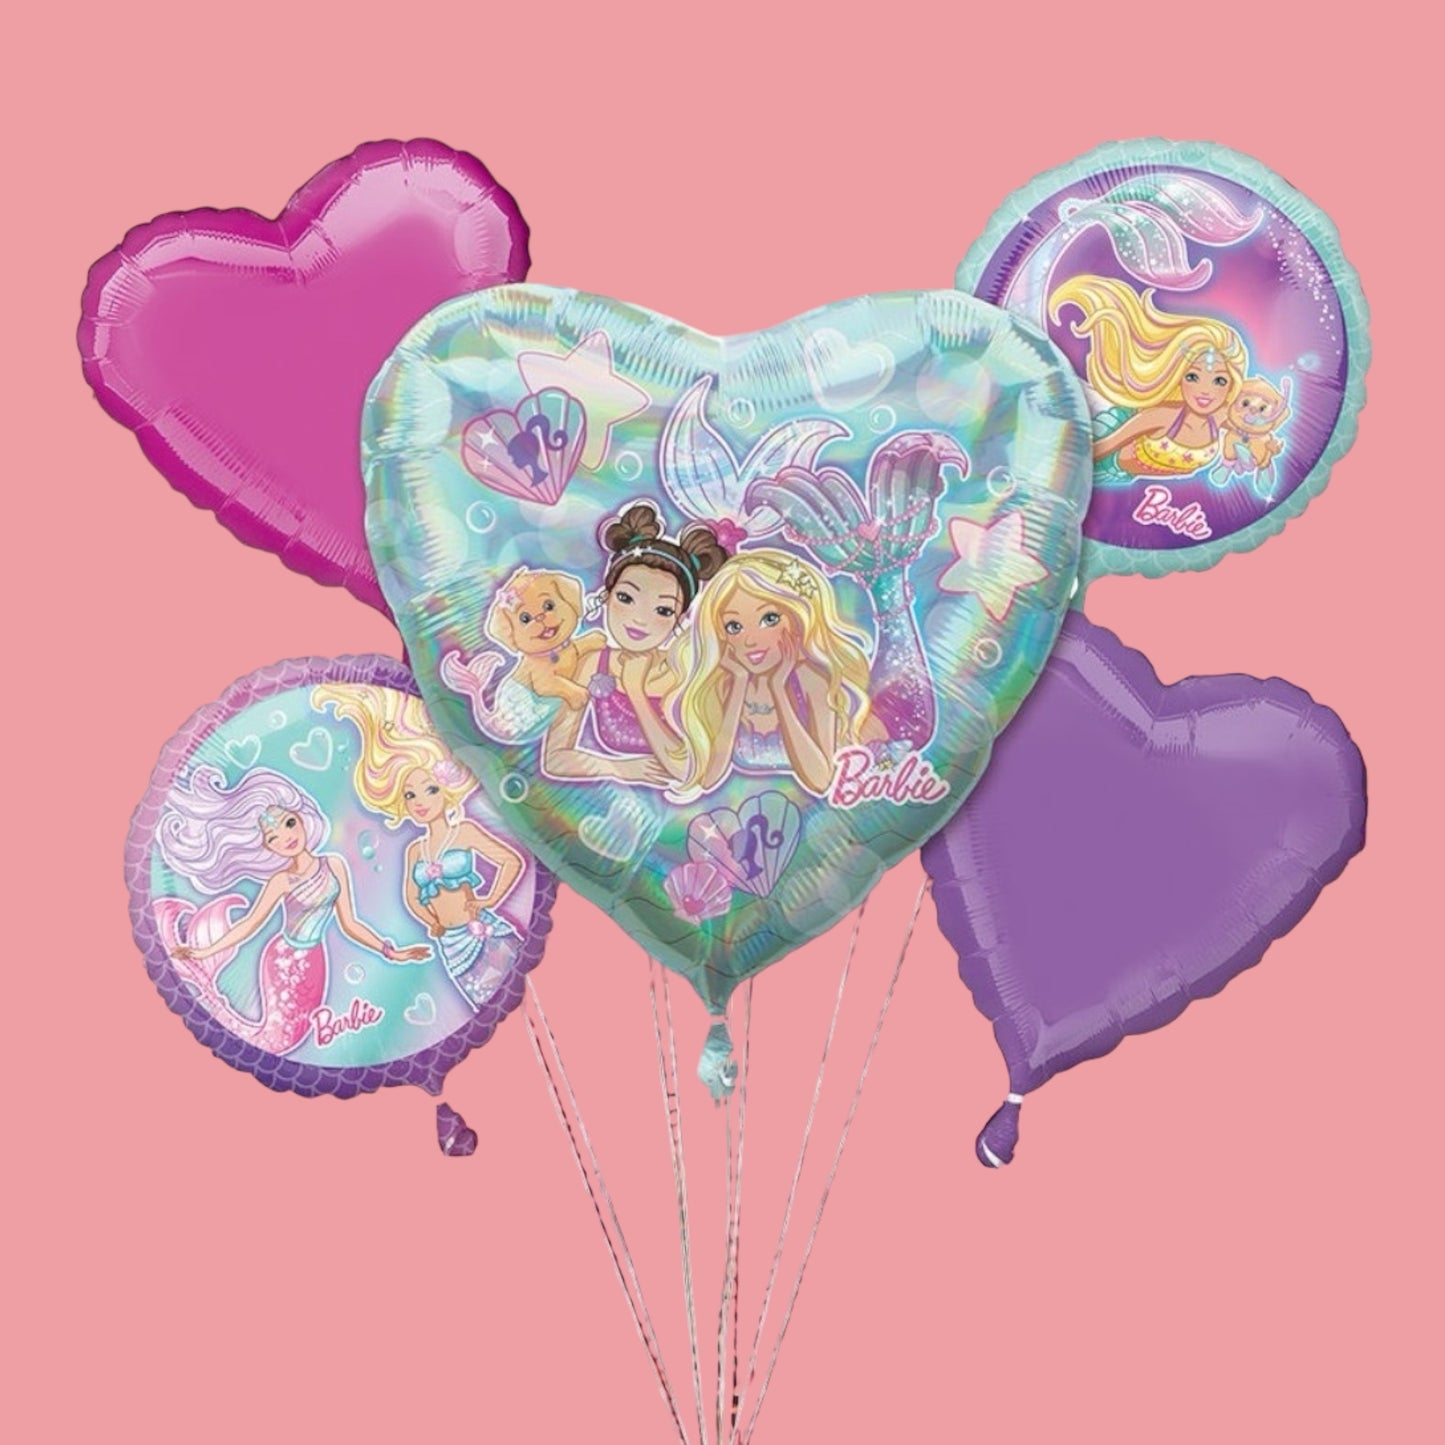 ON SALE Balloons Bouquet